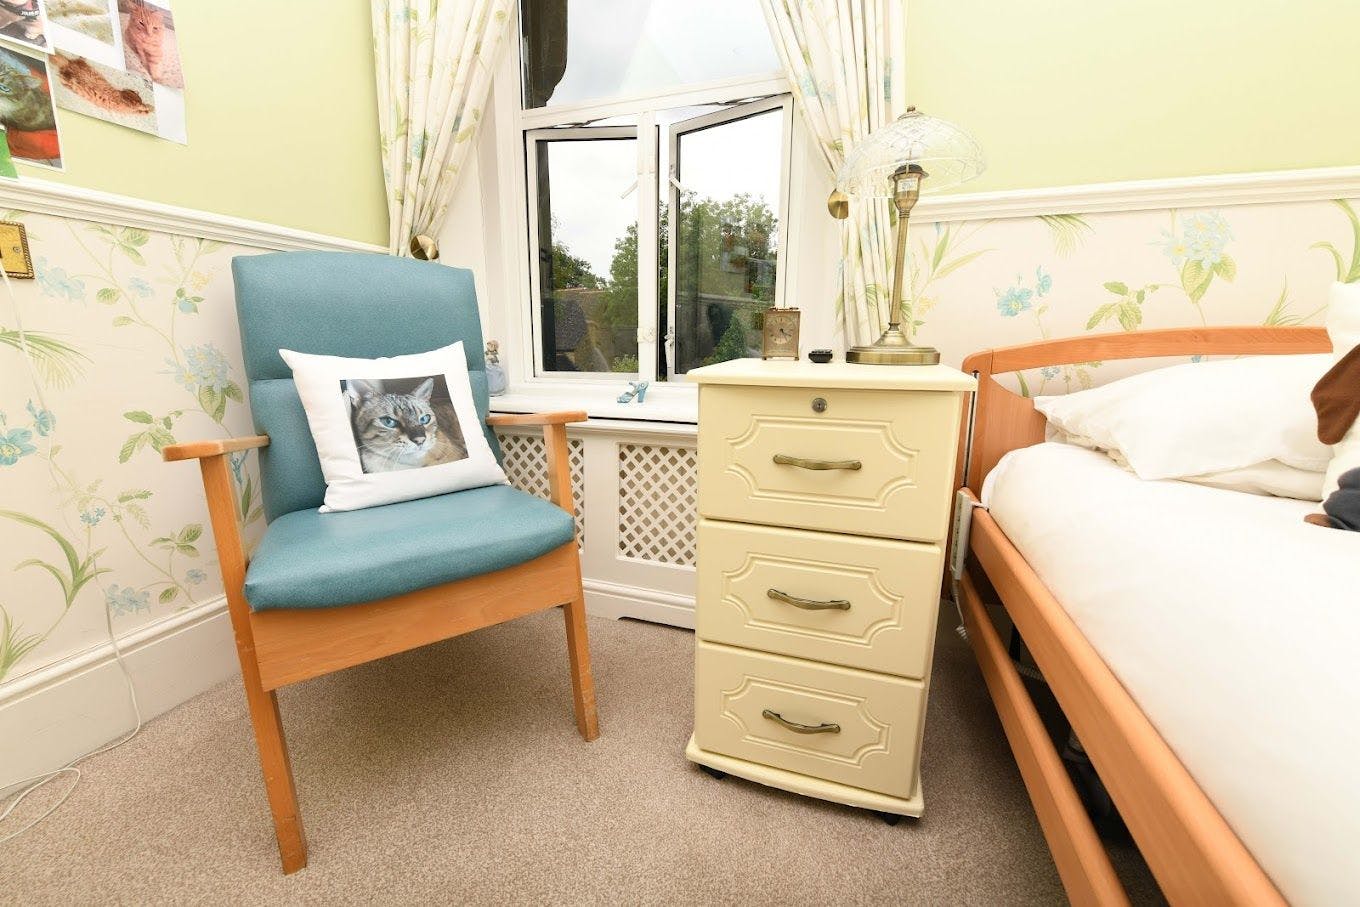  Minchenden Lodge care home in London 9